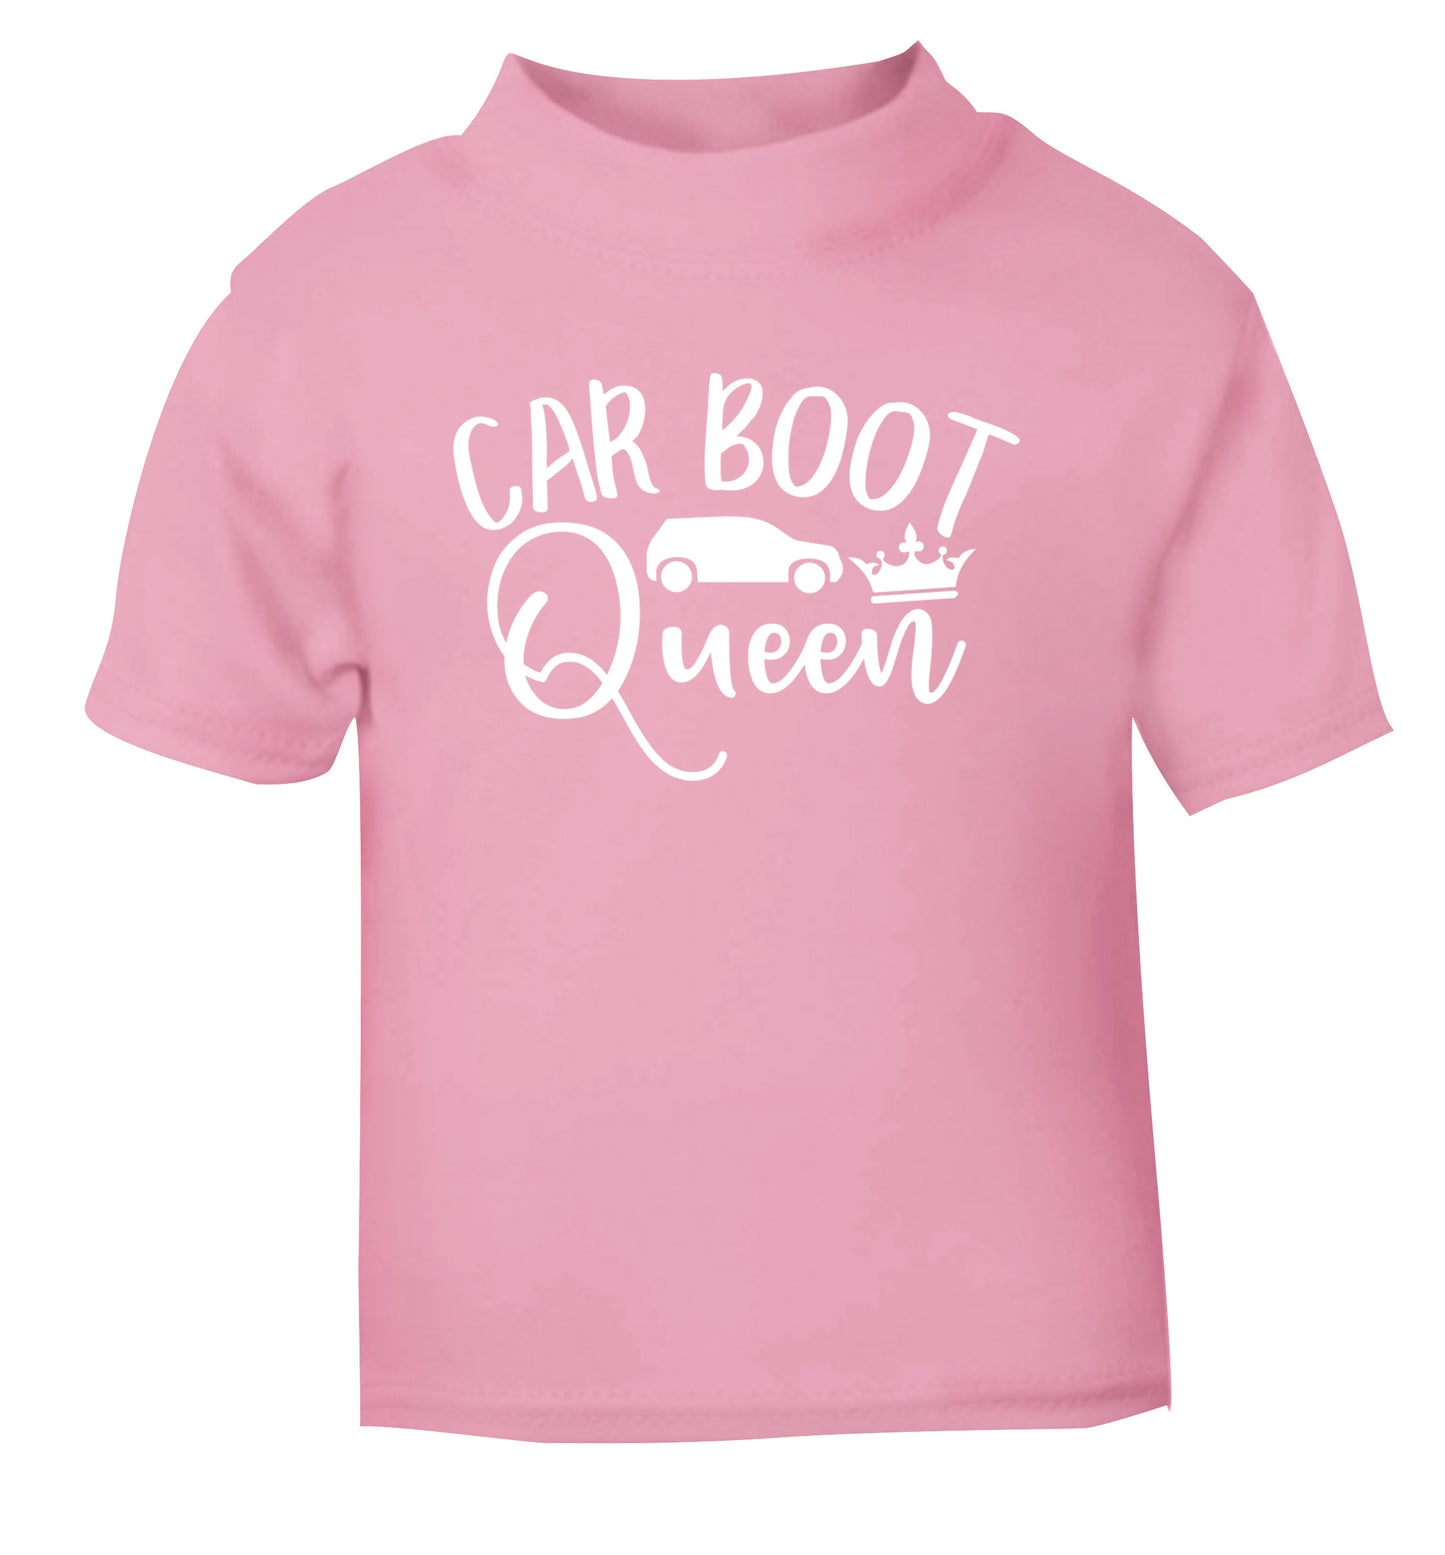 Carboot Queen light pink Baby Toddler Tshirt 2 Years